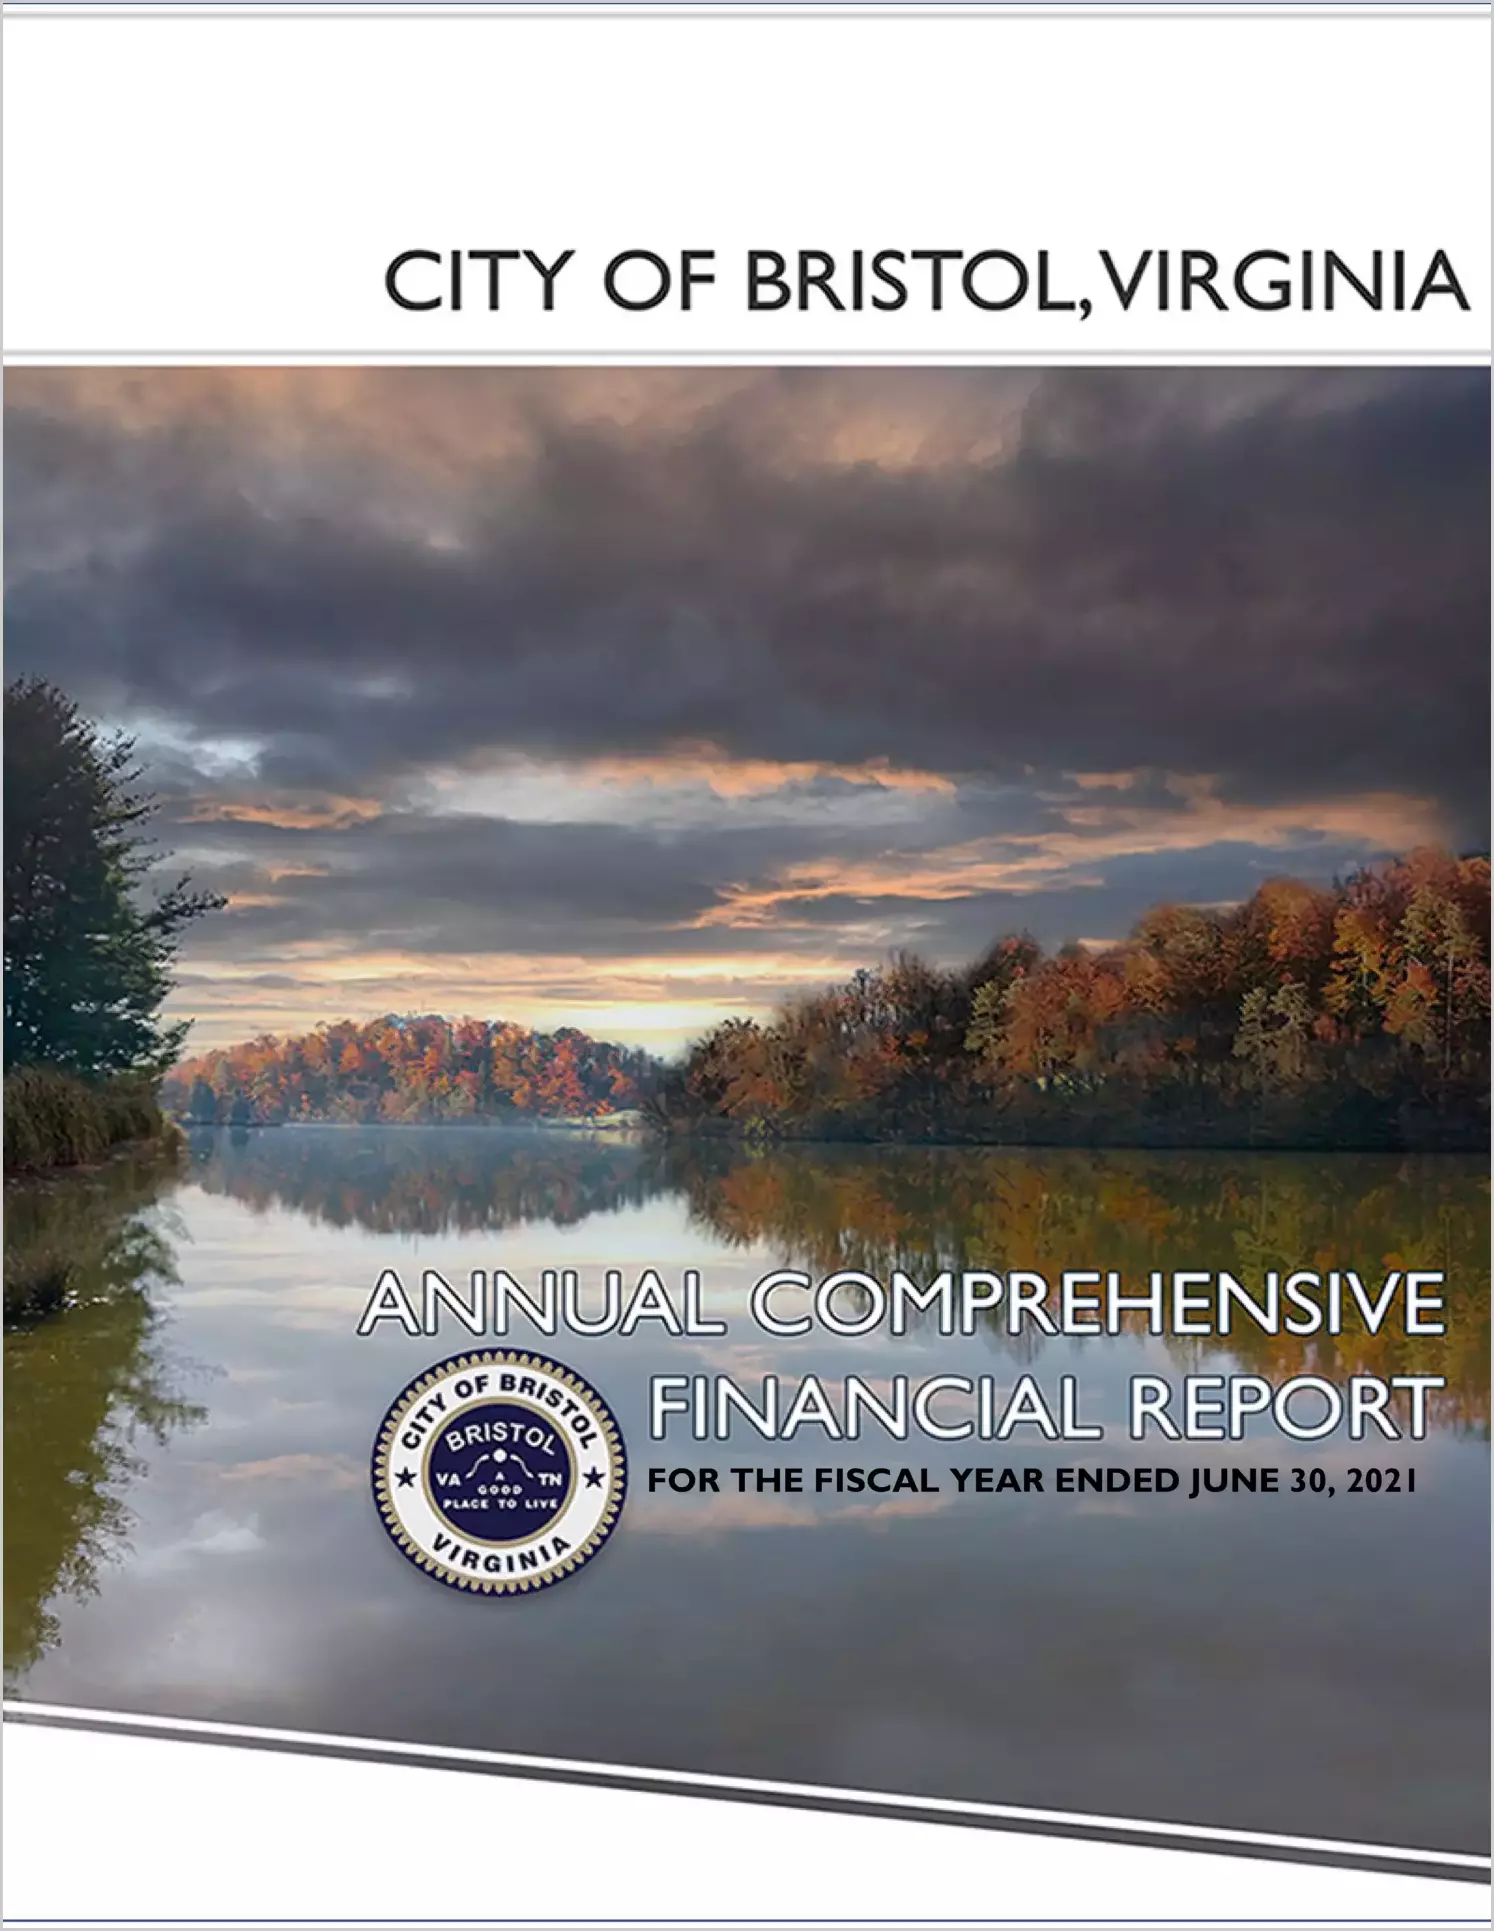 2021 Annual Financial Report for City of Bristol